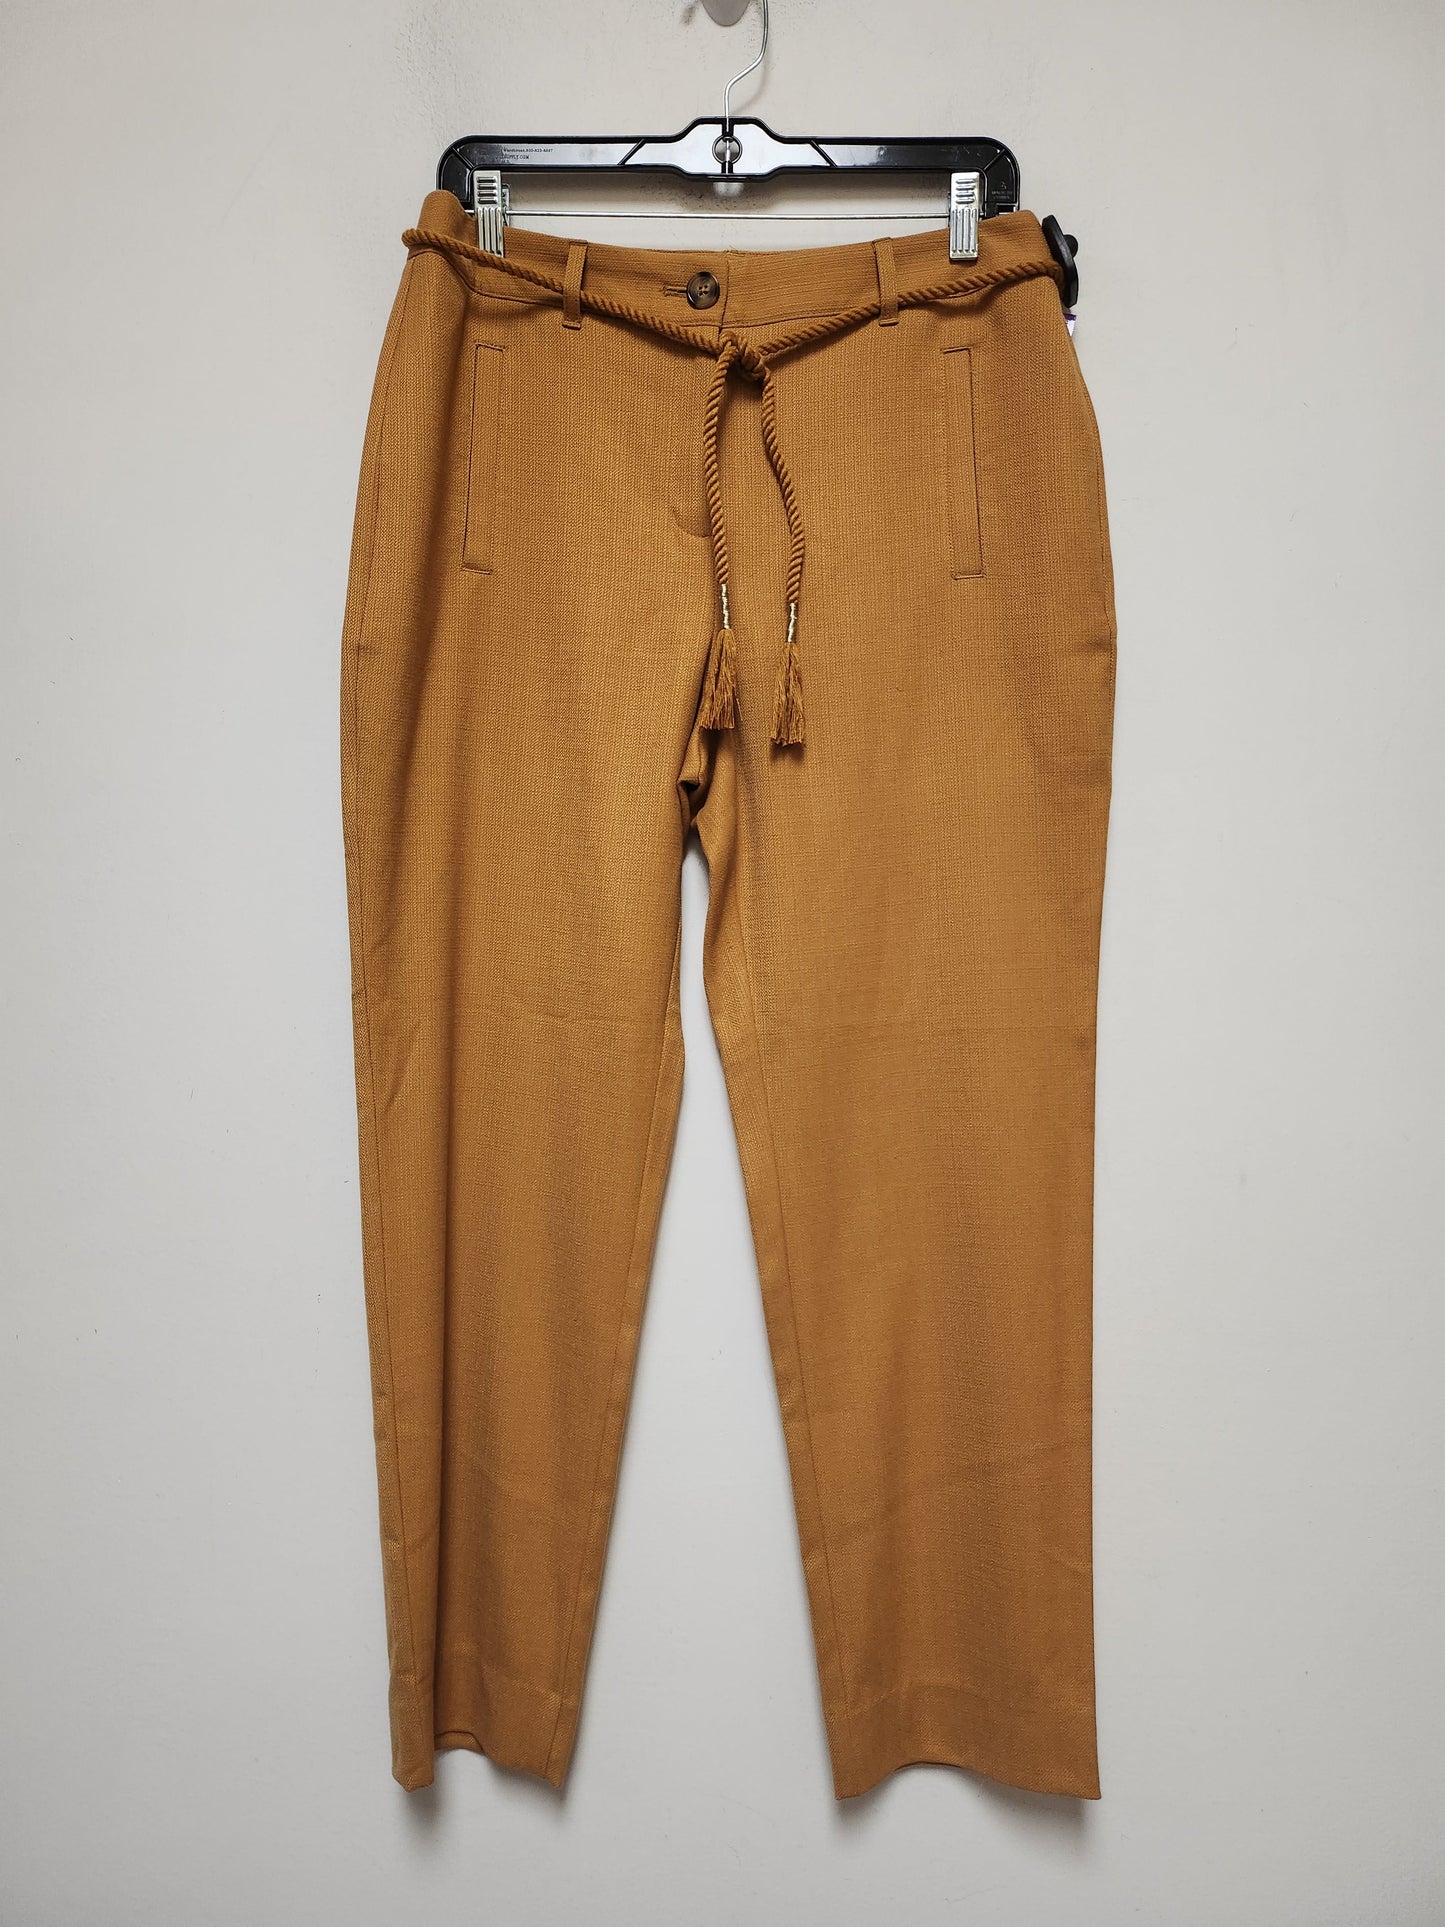 Yellow Pants Other Chicos, Size 4